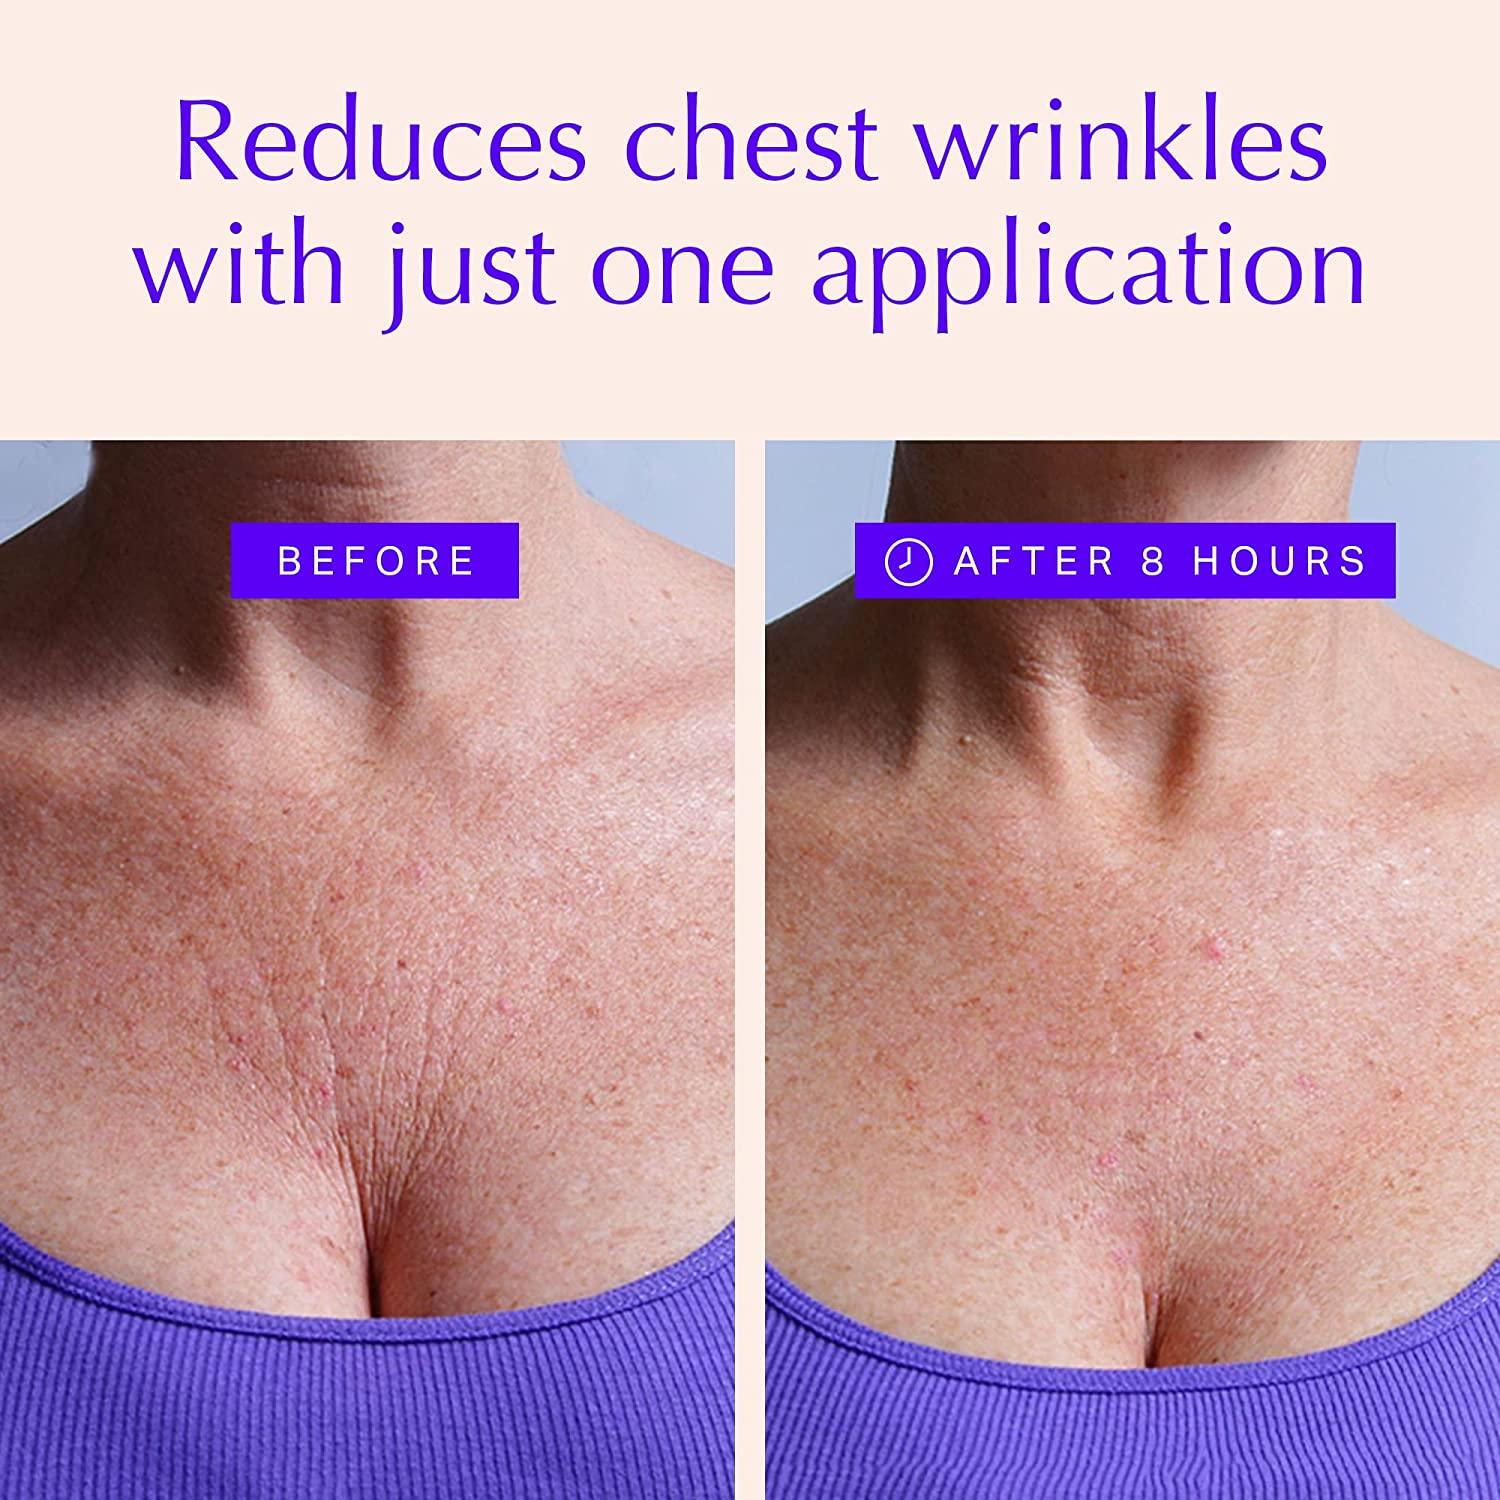 How to Get Rid of Cleavage and Chest Wrinkles  Chest wrinkles, Cleavage  wrinkles, Anti aging skin products